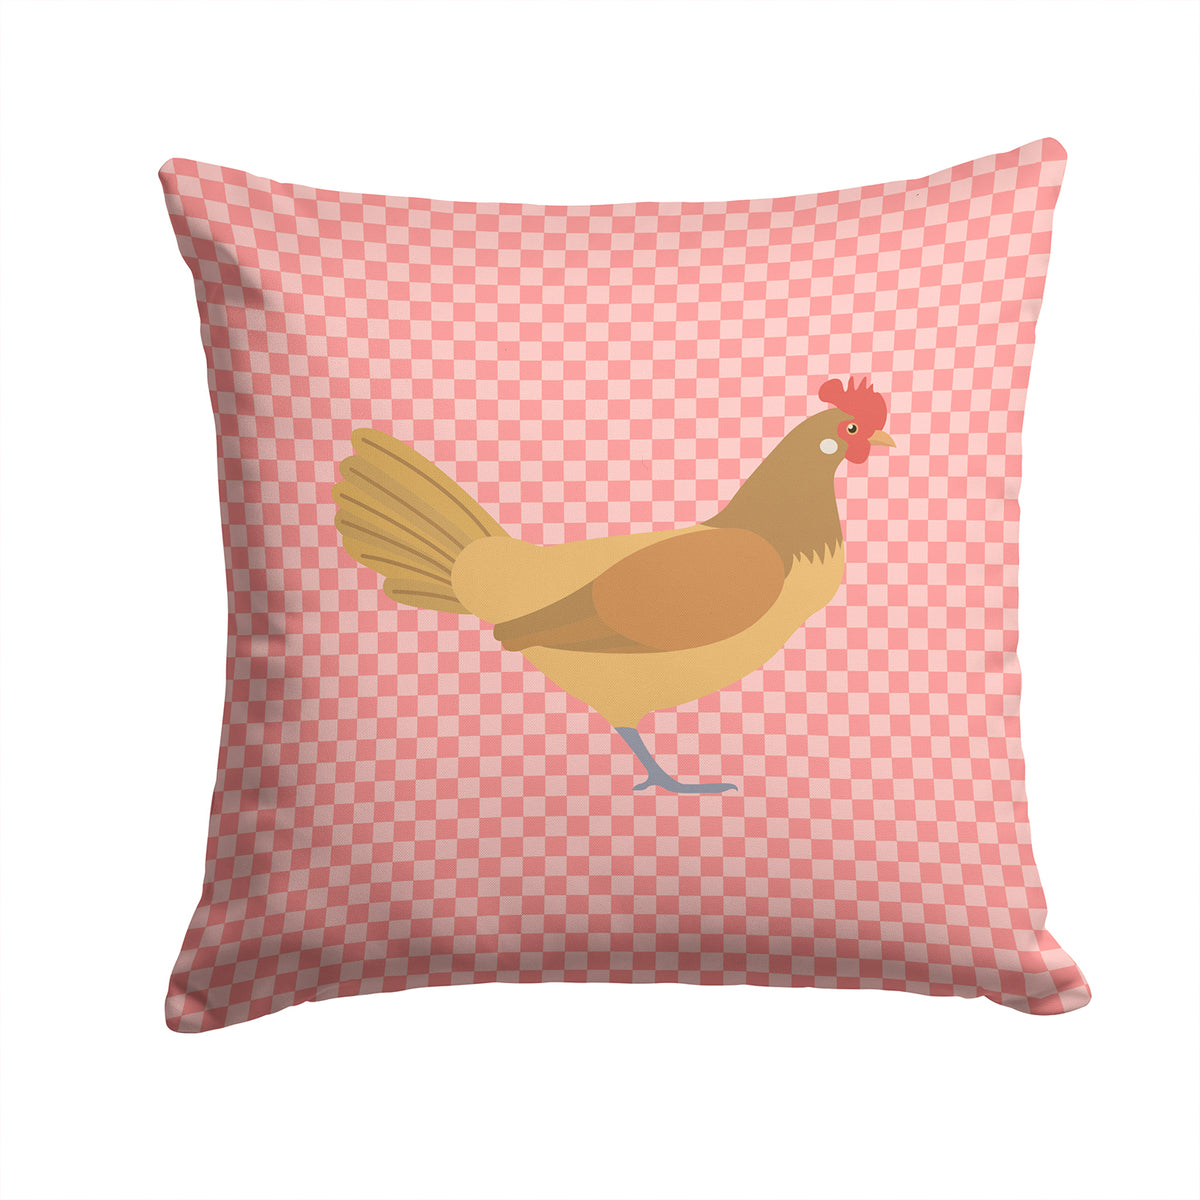 Frisian Friesian Chicken Pink Check Fabric Decorative Pillow BB7832PW1414 - the-store.com